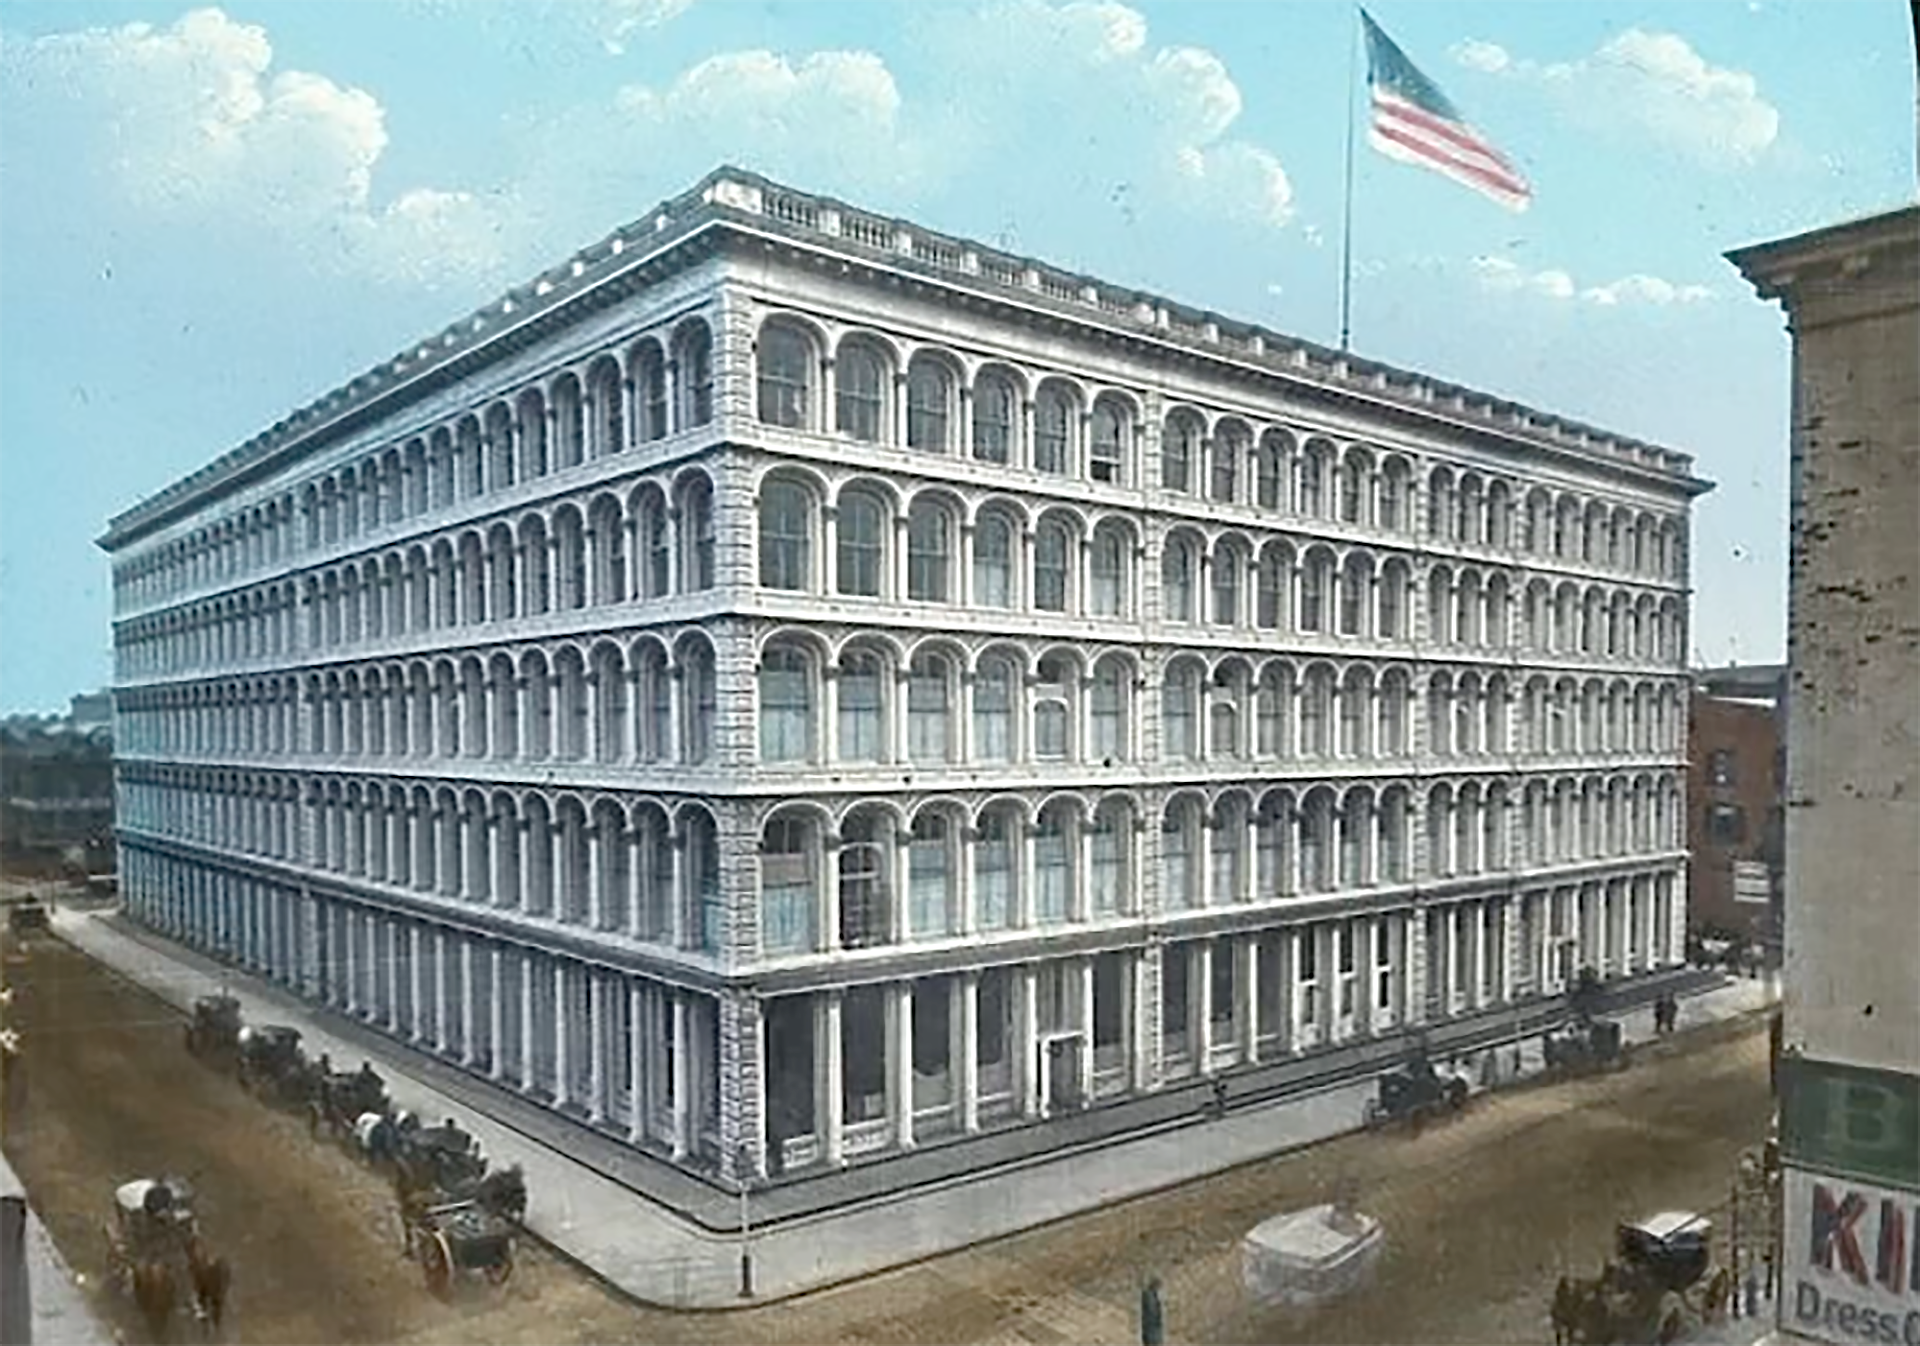 Z1920x1346px-The-fine-office-building-of-E.-&-H.-T.-Anthony-&-Company-situated-at-591-Broadway,-New-York,-USA.-Date--circa-1890-vWA24